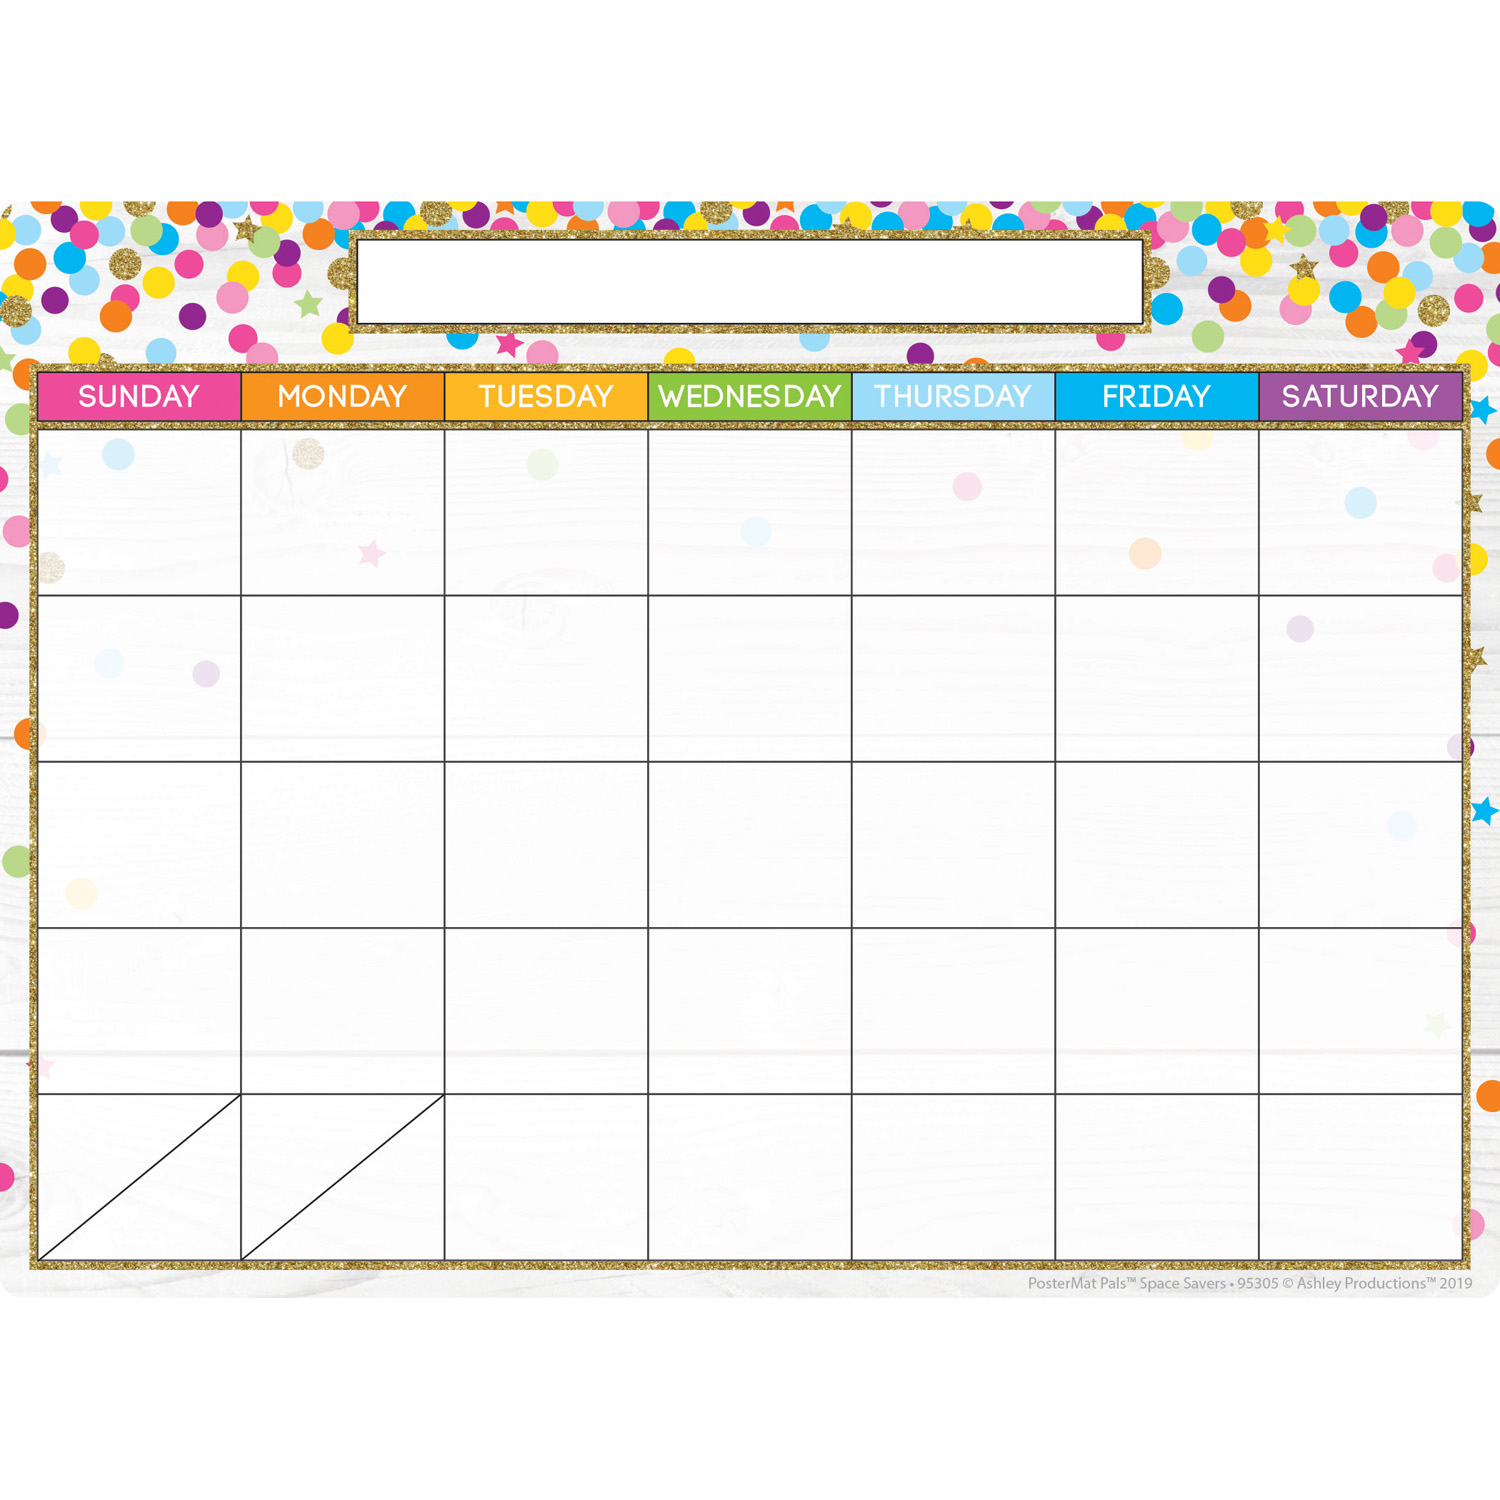 Smart Poly Single Sided PosterMat Pals Space Savers, Calendar Confetti Style, 13" x 9.5"